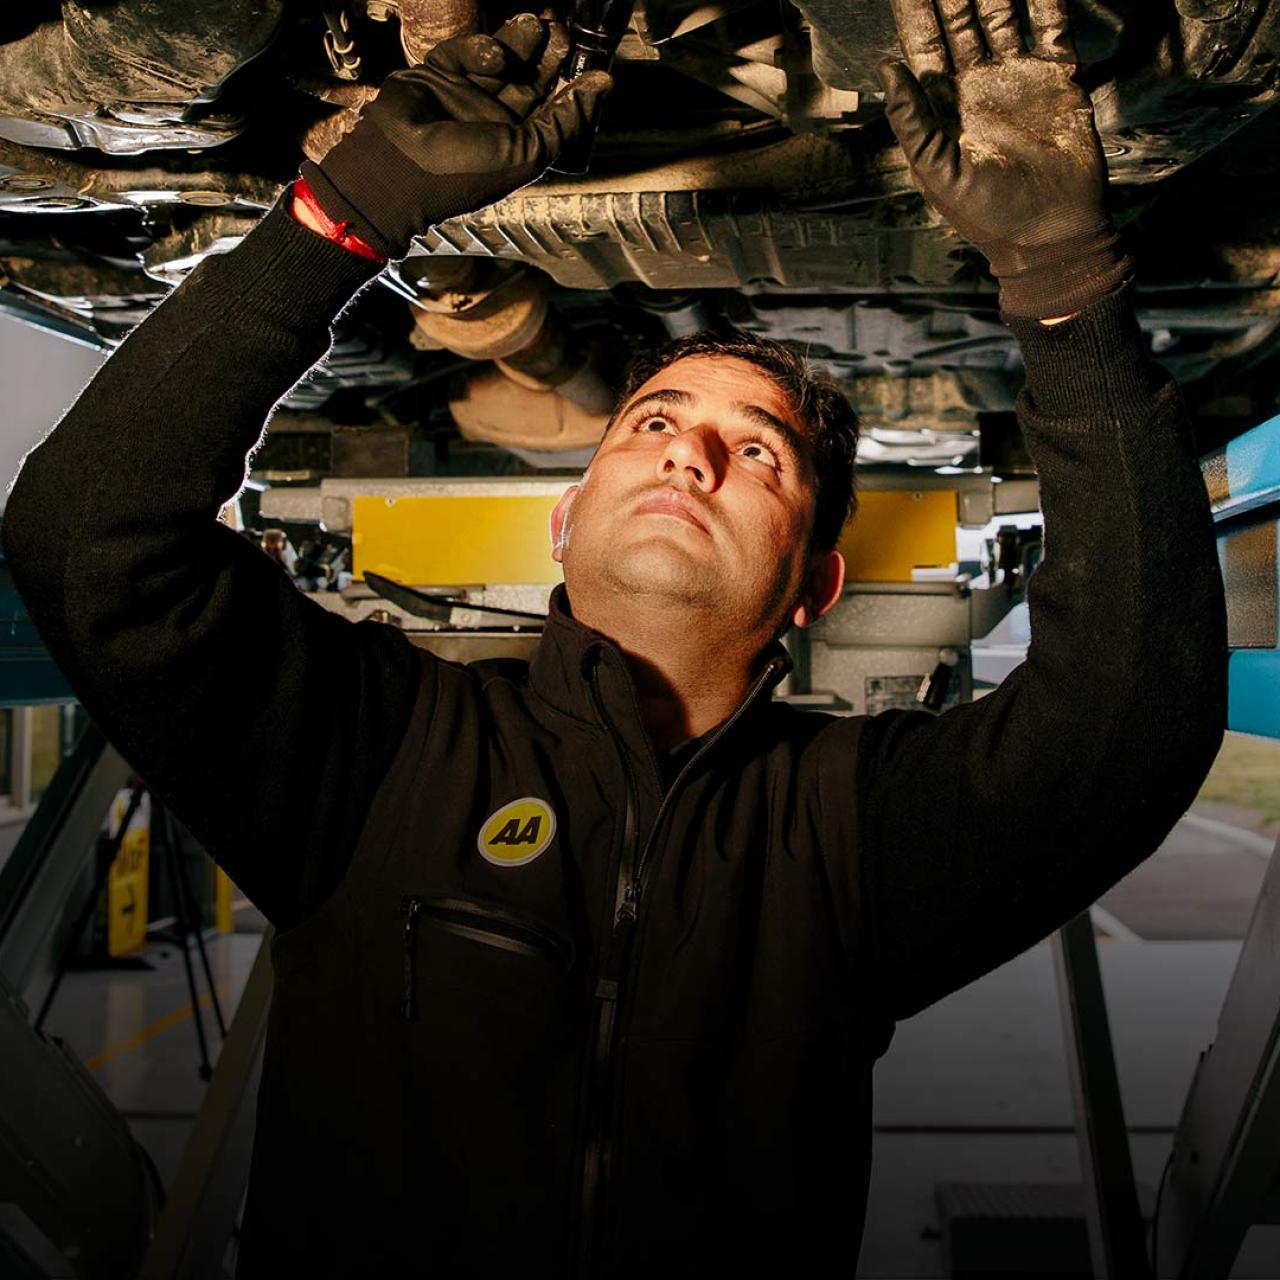 Buying a new car? Find out how a vehicle inspection can help